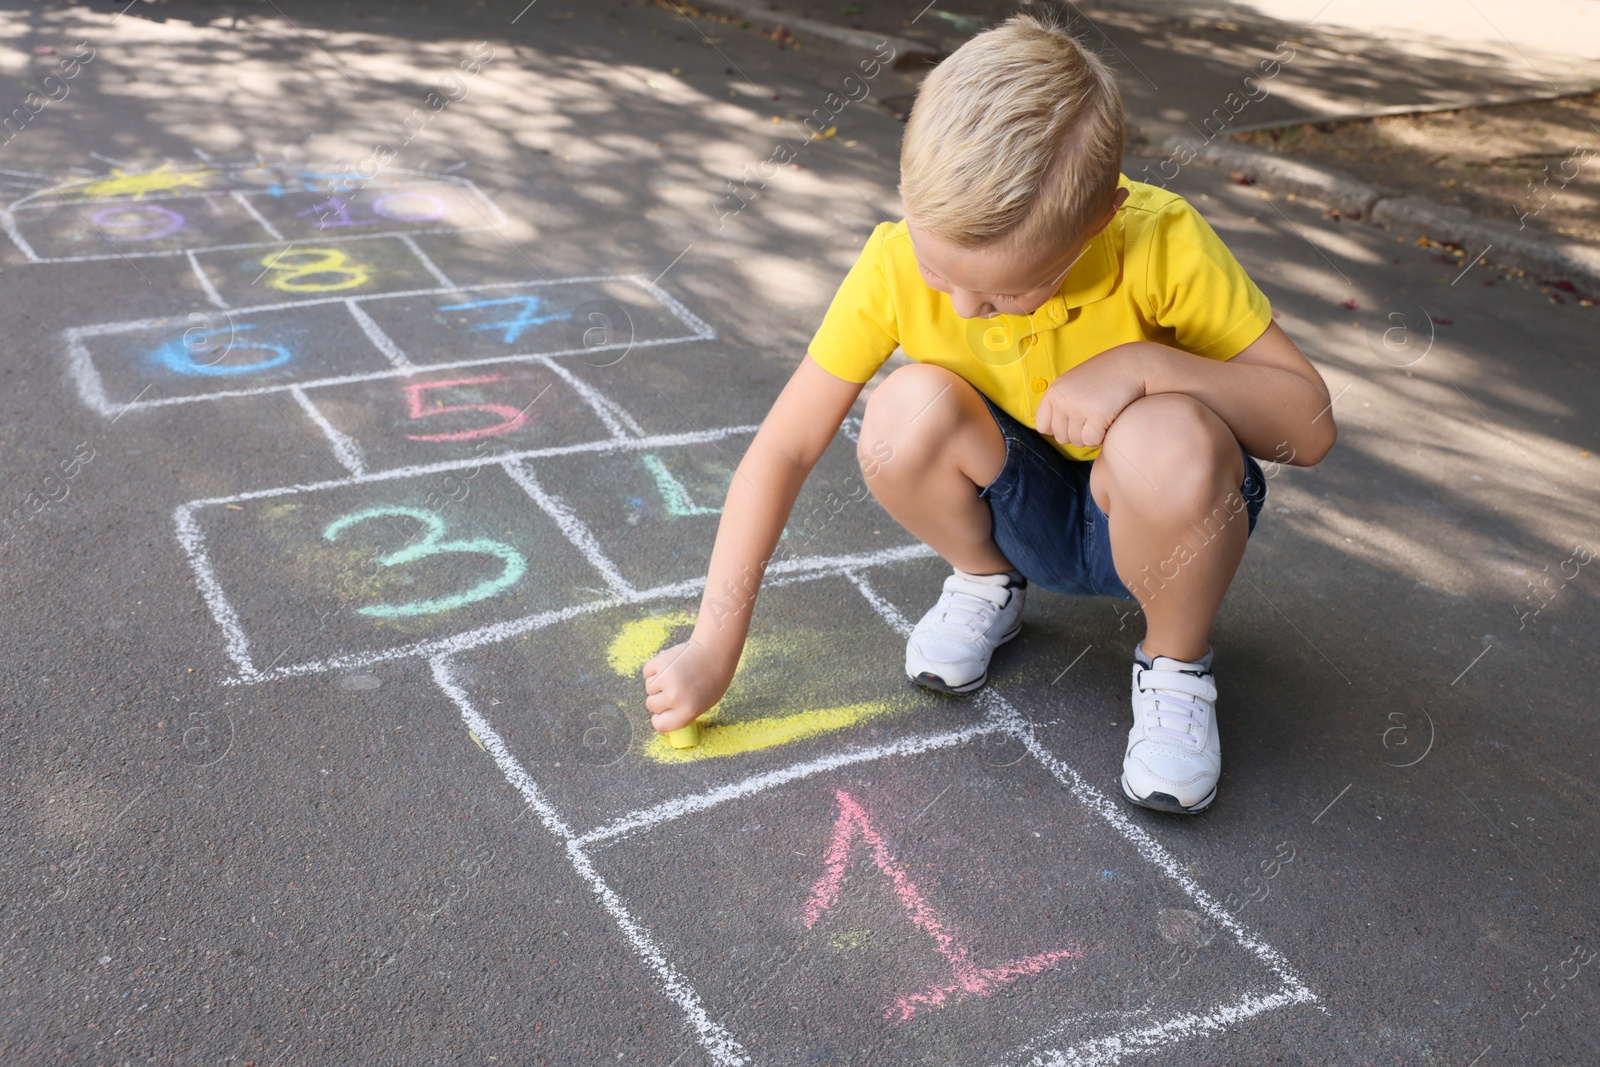 Photo of Little boy drawing hopscotch with chalk on asphalt outdoors. Happy childhood